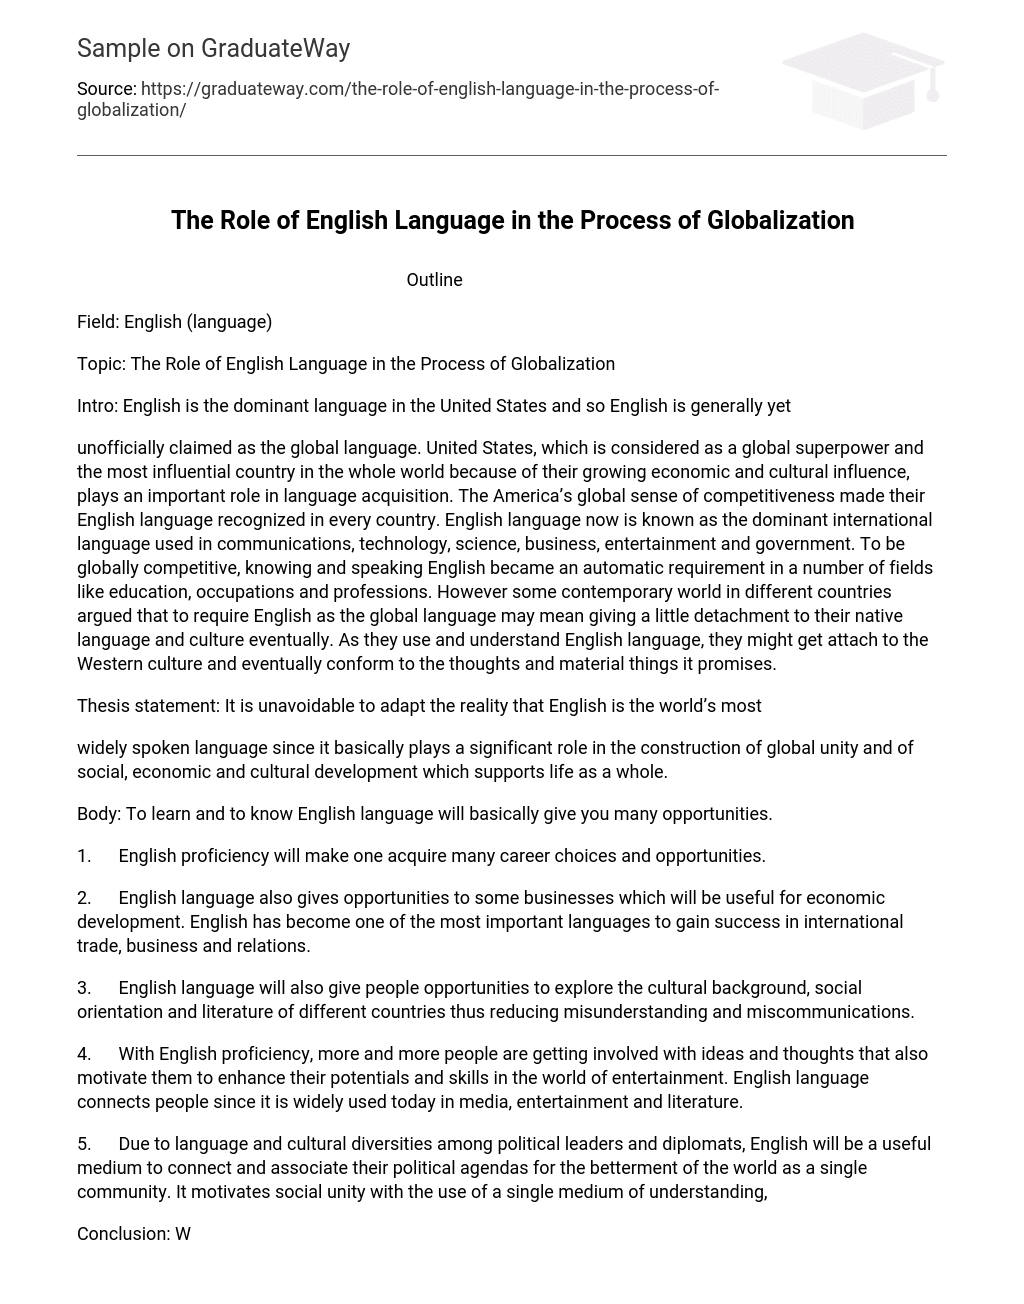 The Role of English Language in the Process of Globalization